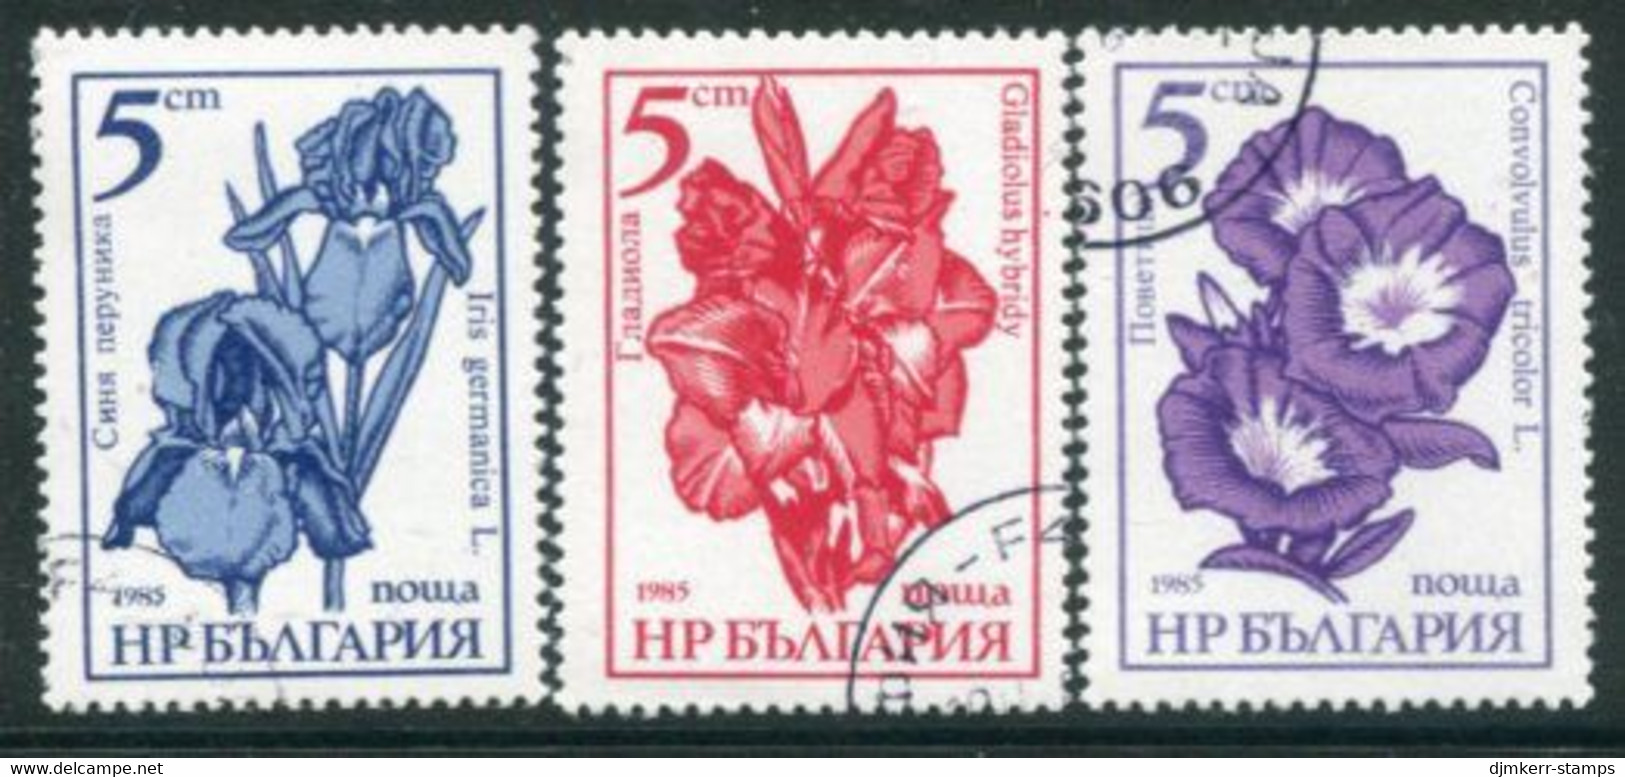 BULGARIA 1985 Garden Flowers Used.  Michel 3405-07 - Used Stamps